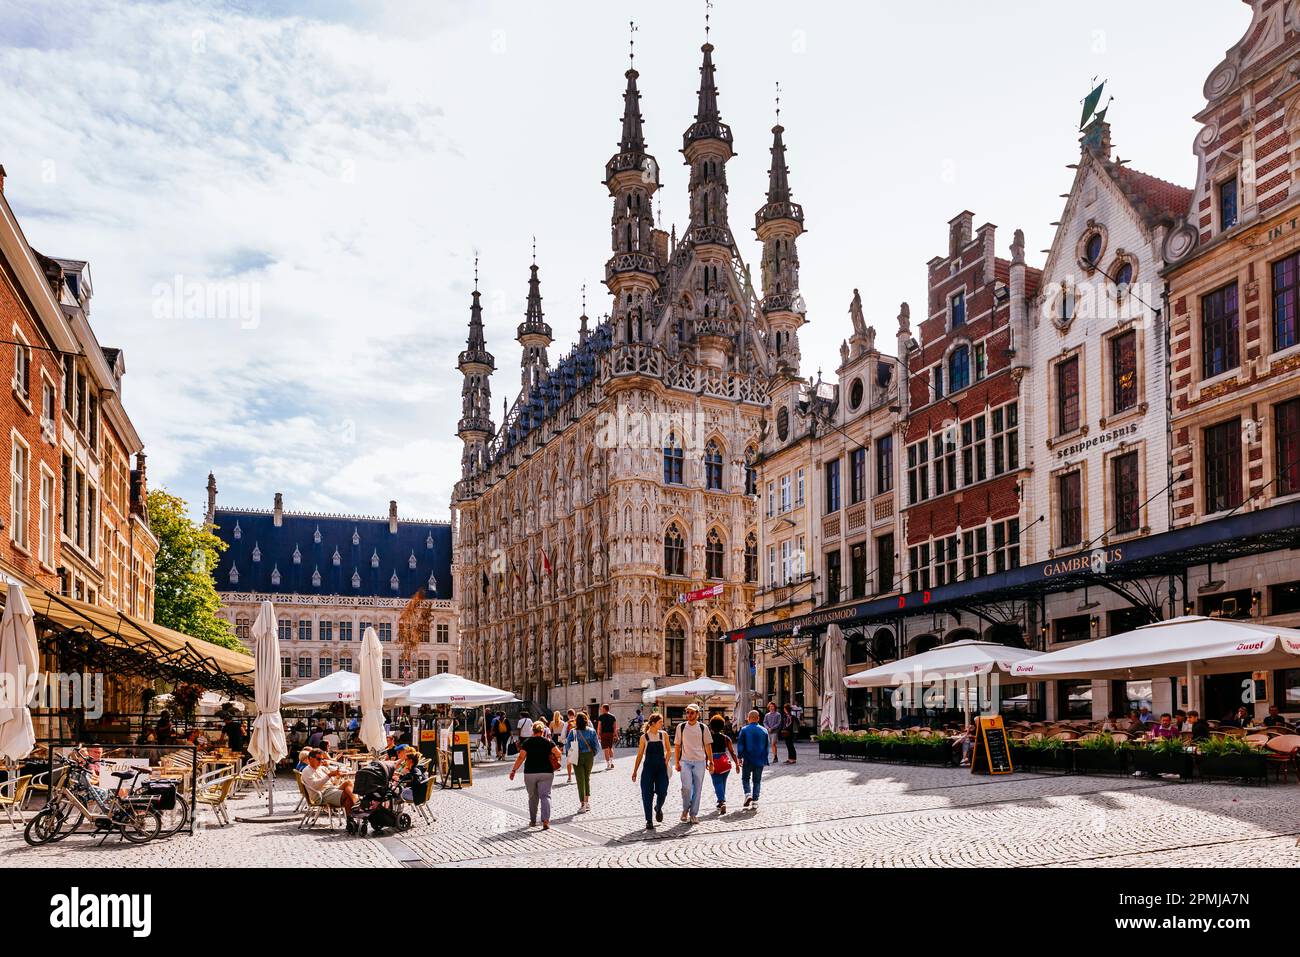 The Grote Markt is the central square of Leuven. Most of the square's buildings are built in the Gothic style, of which the Town Hall is a prime examp Stock Photo